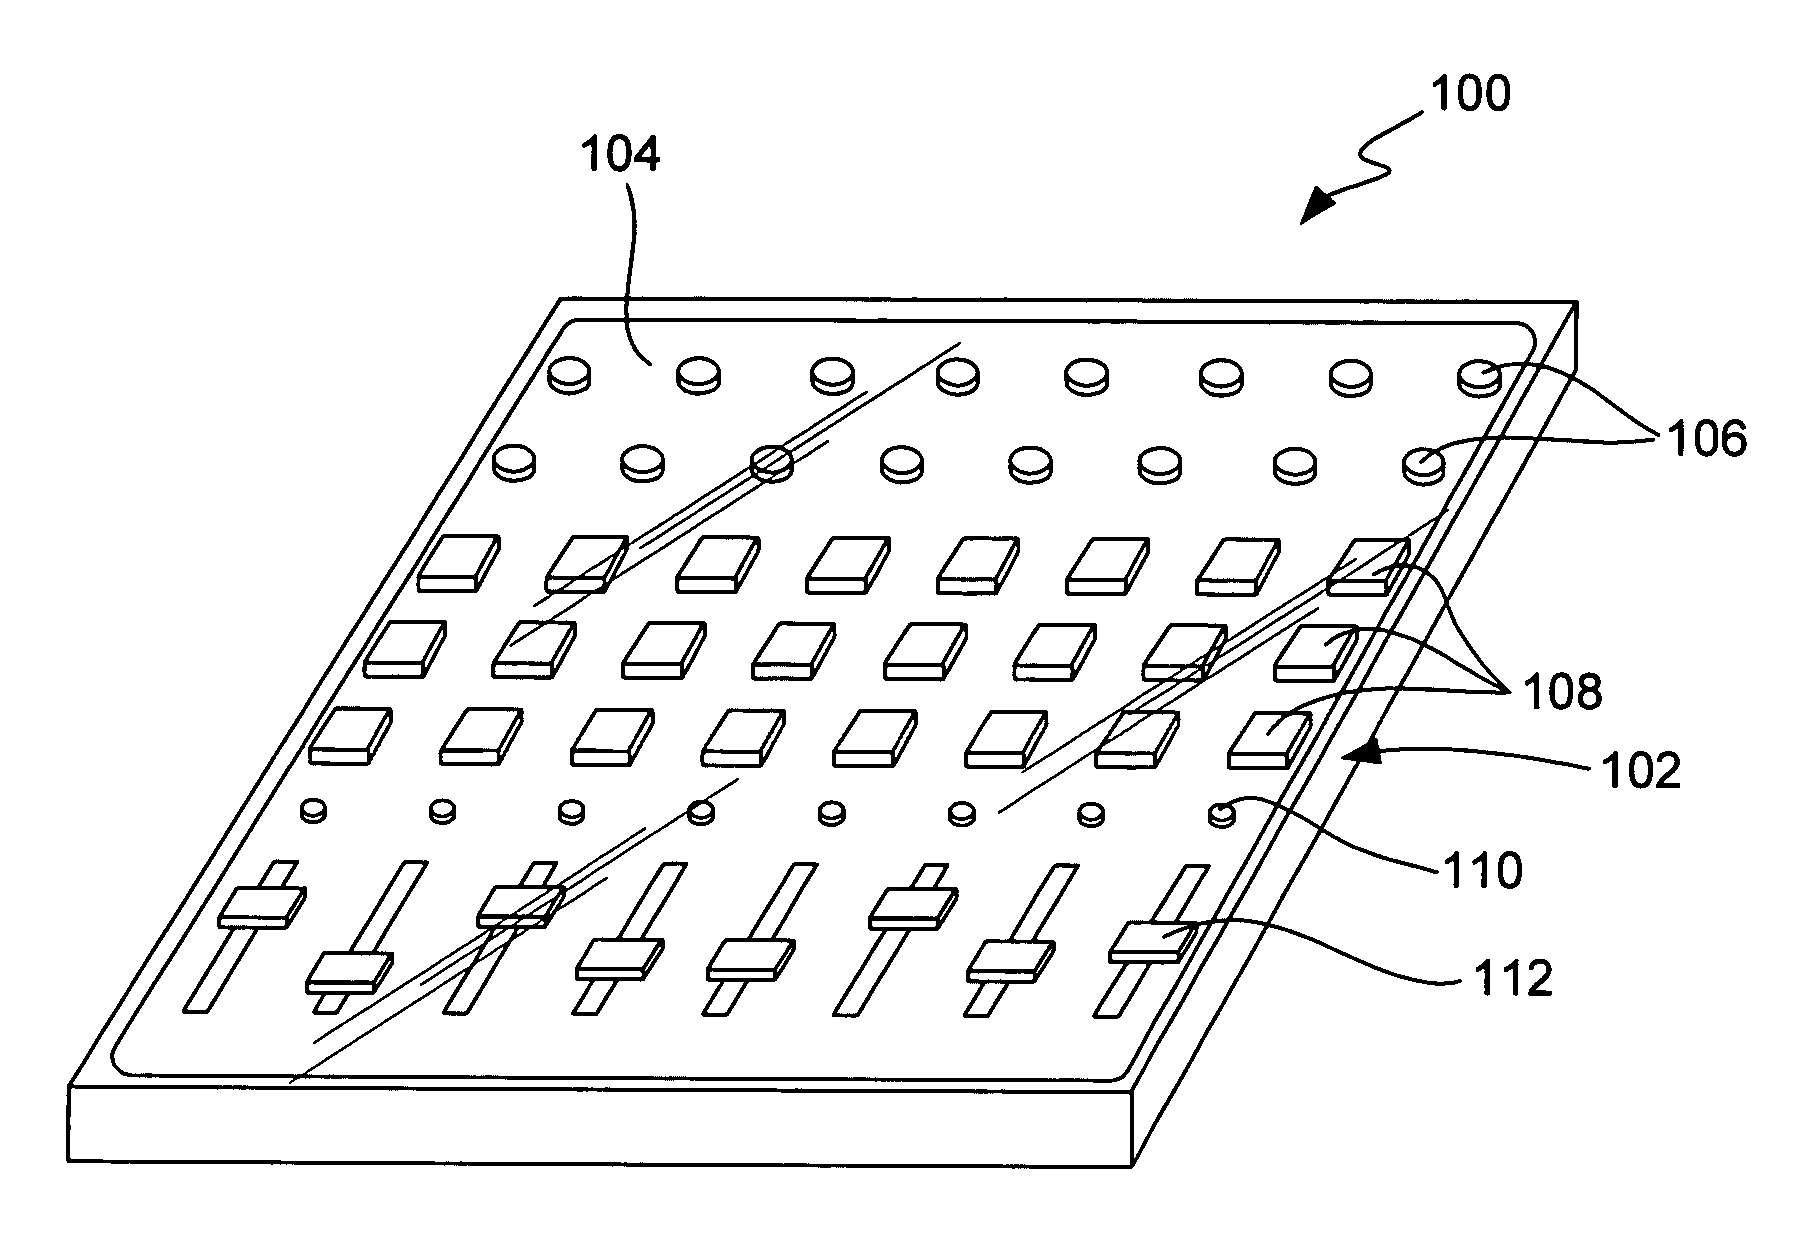 Touch-sensitive electronic apparatus for media applications, and methods therefor